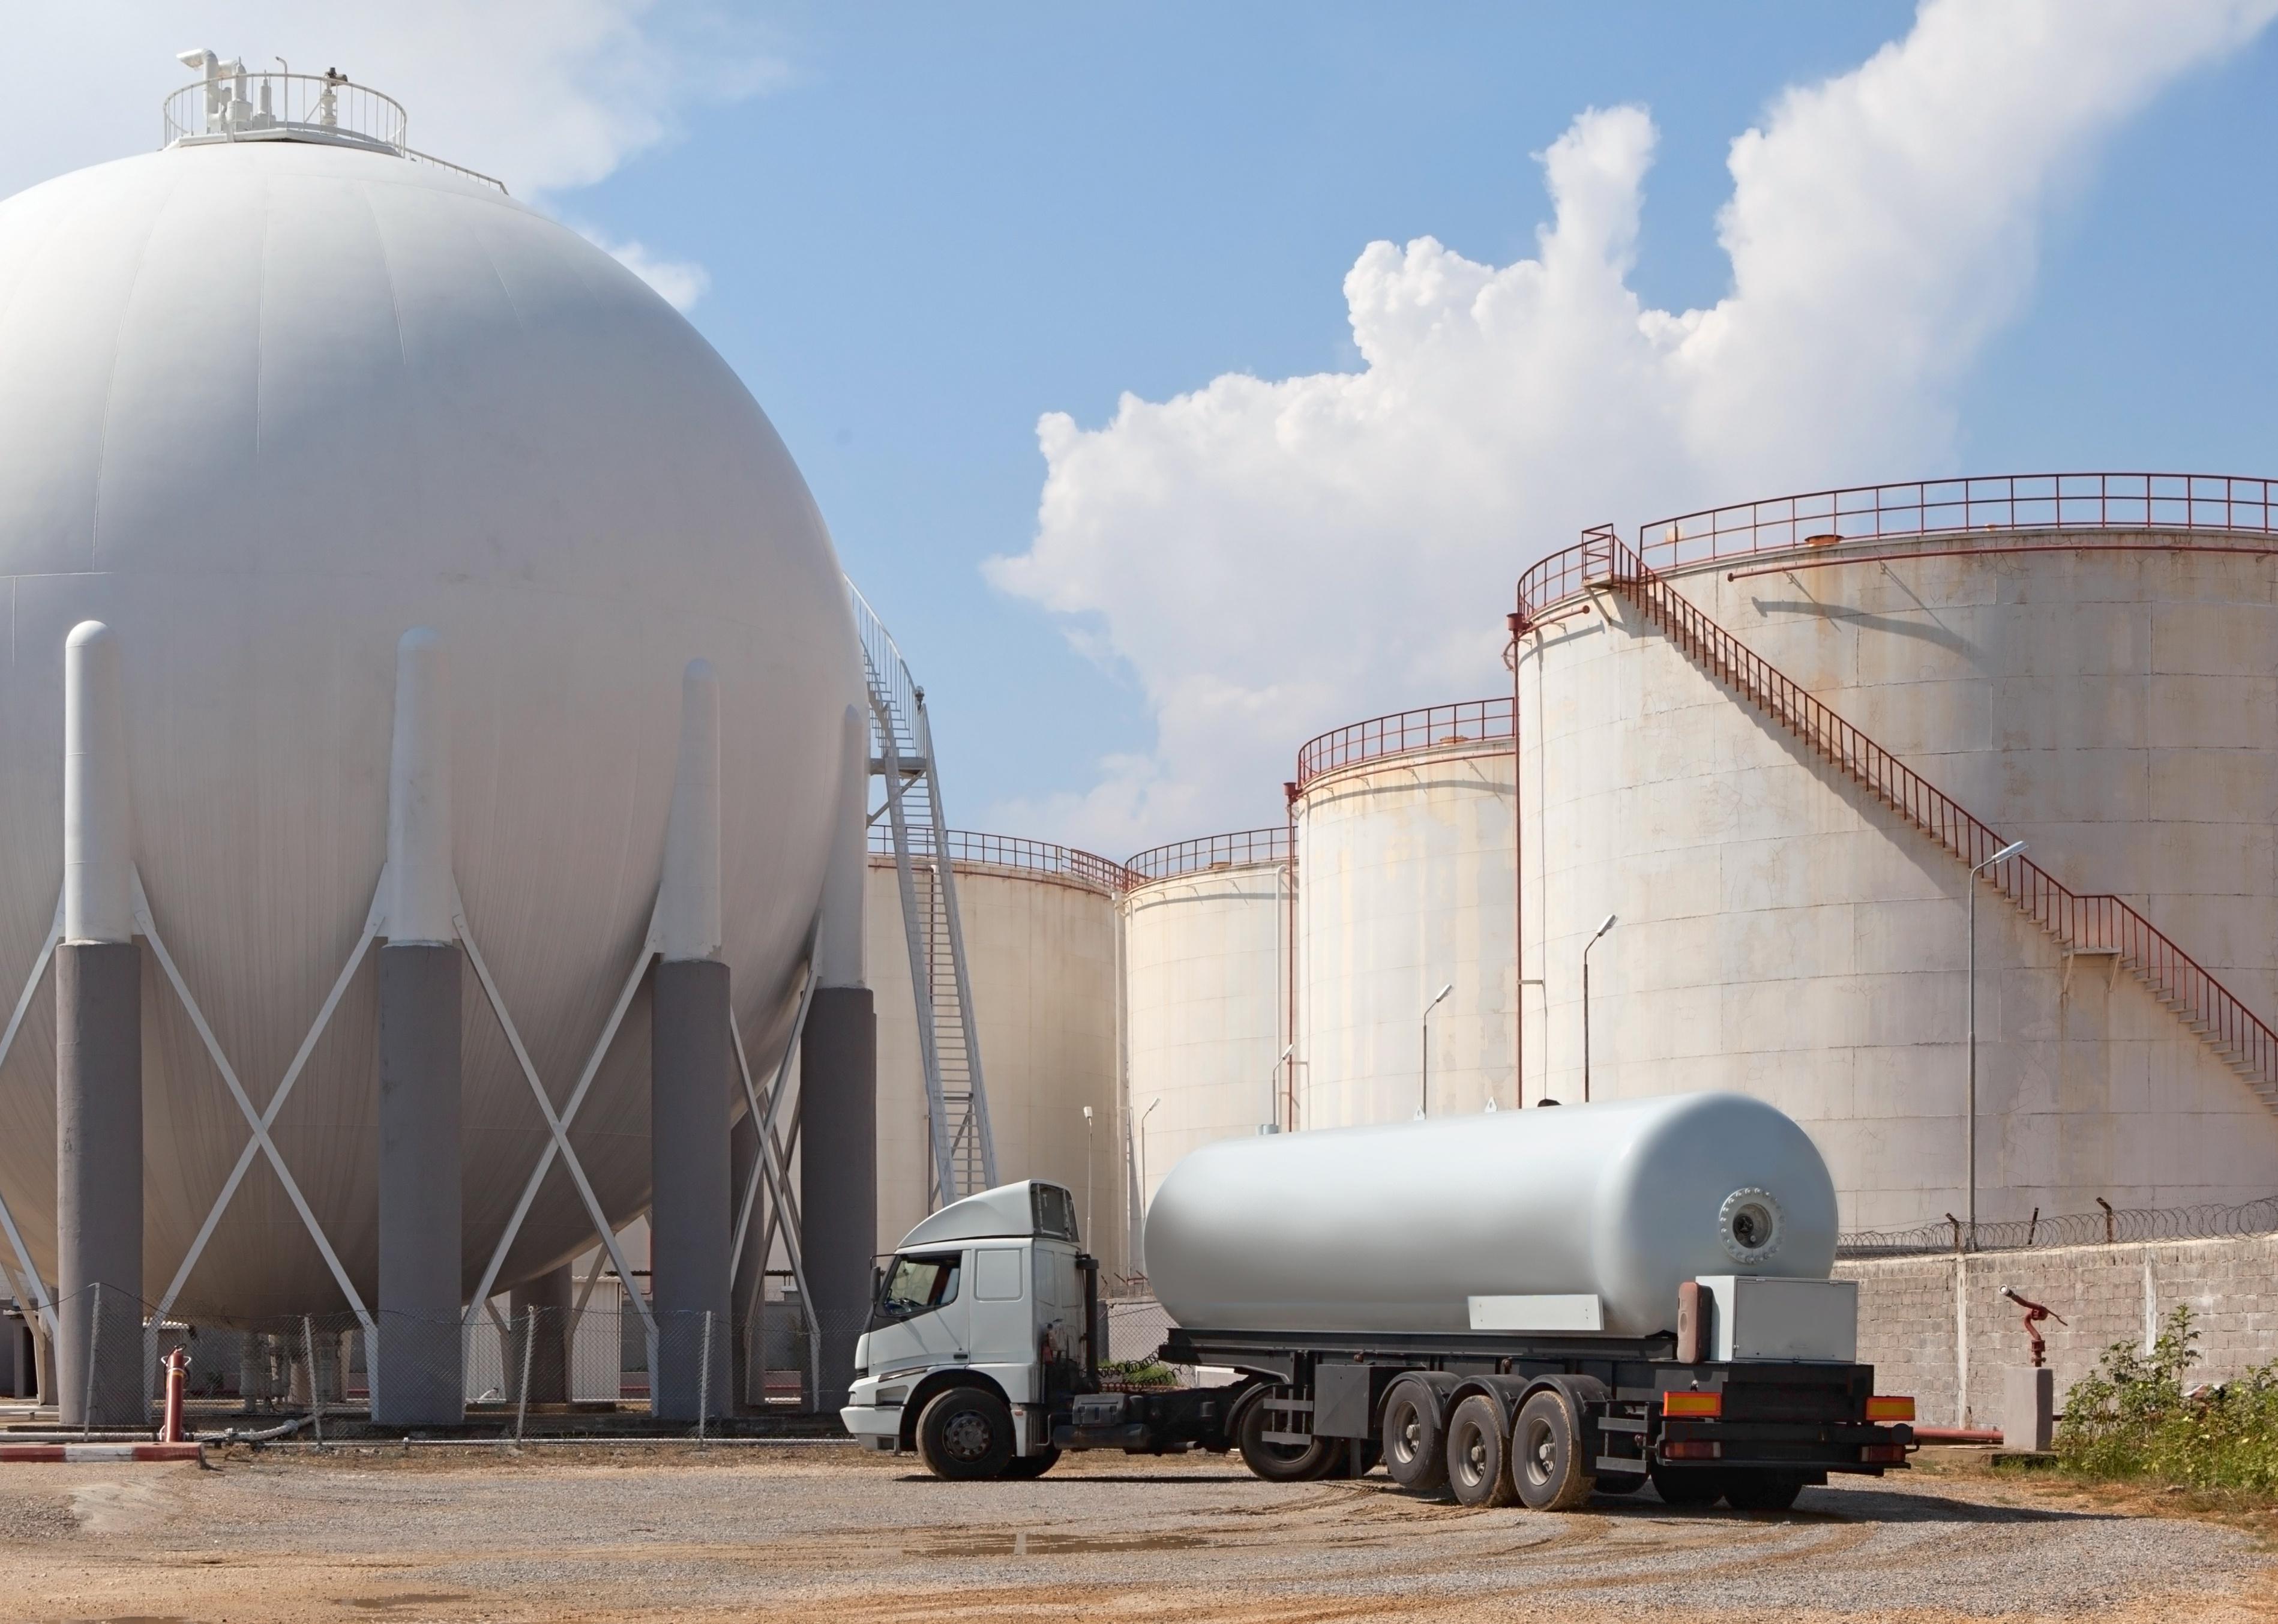 Workers load a tanker with liquefied natural gas.